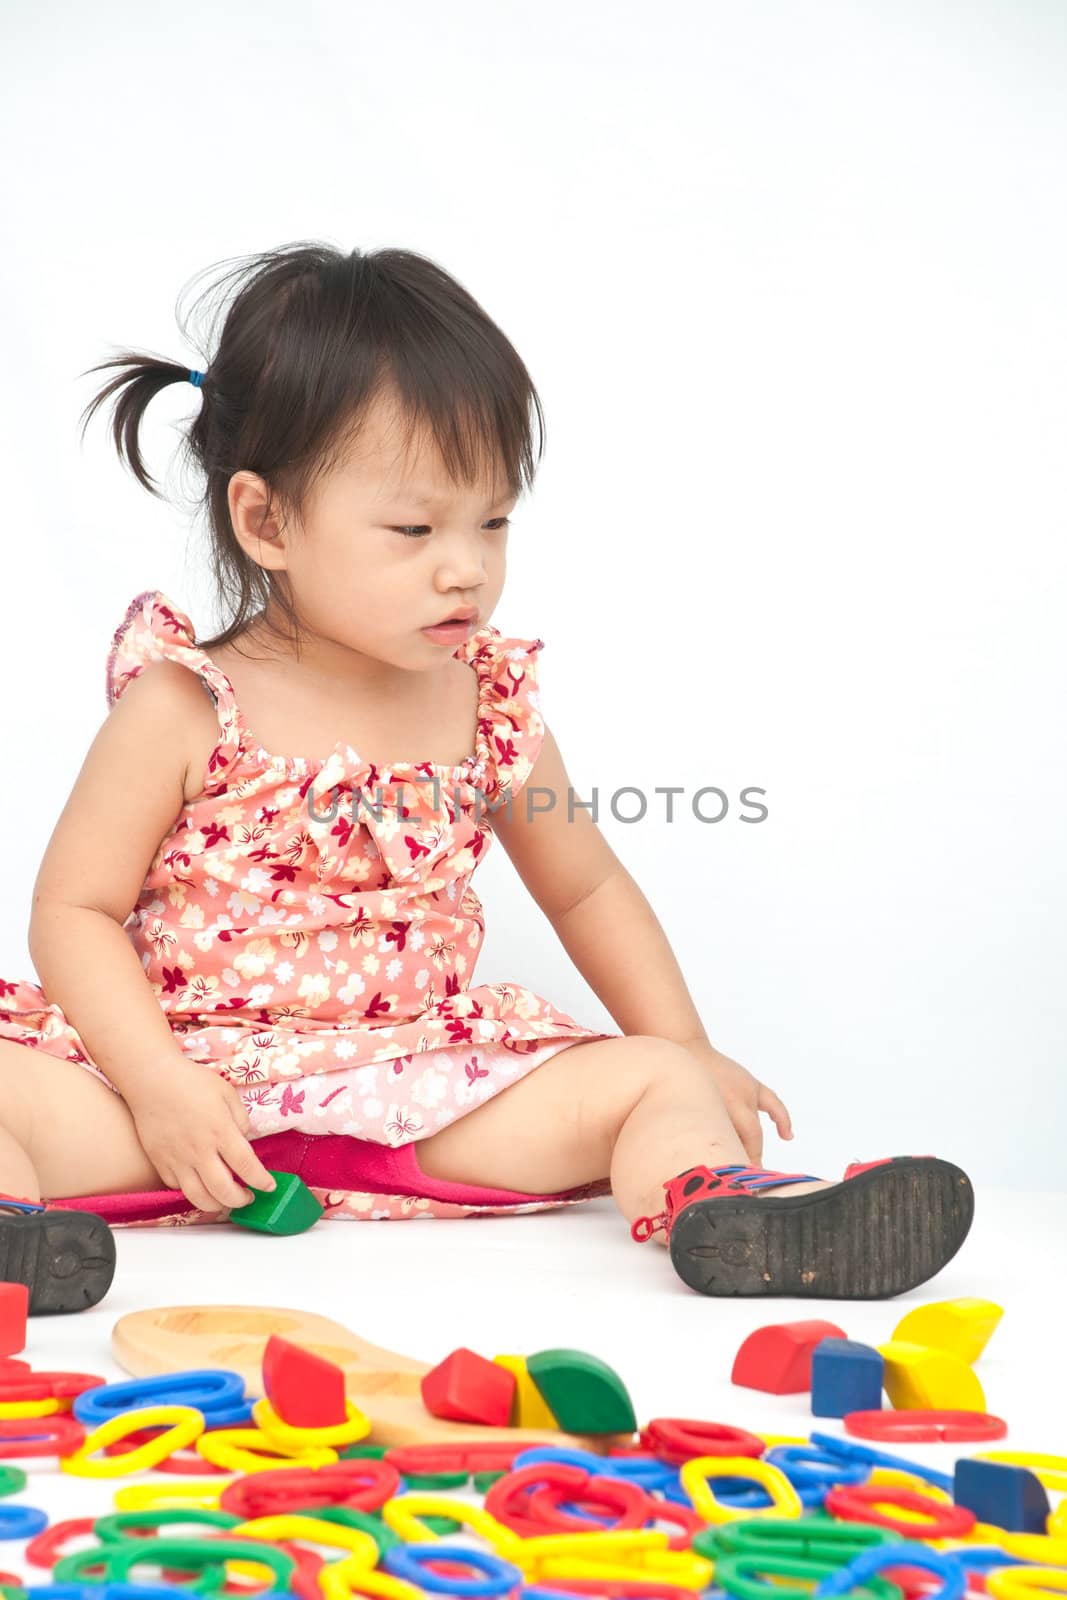 Little girl playing with toy on isolate background by Yuri2012